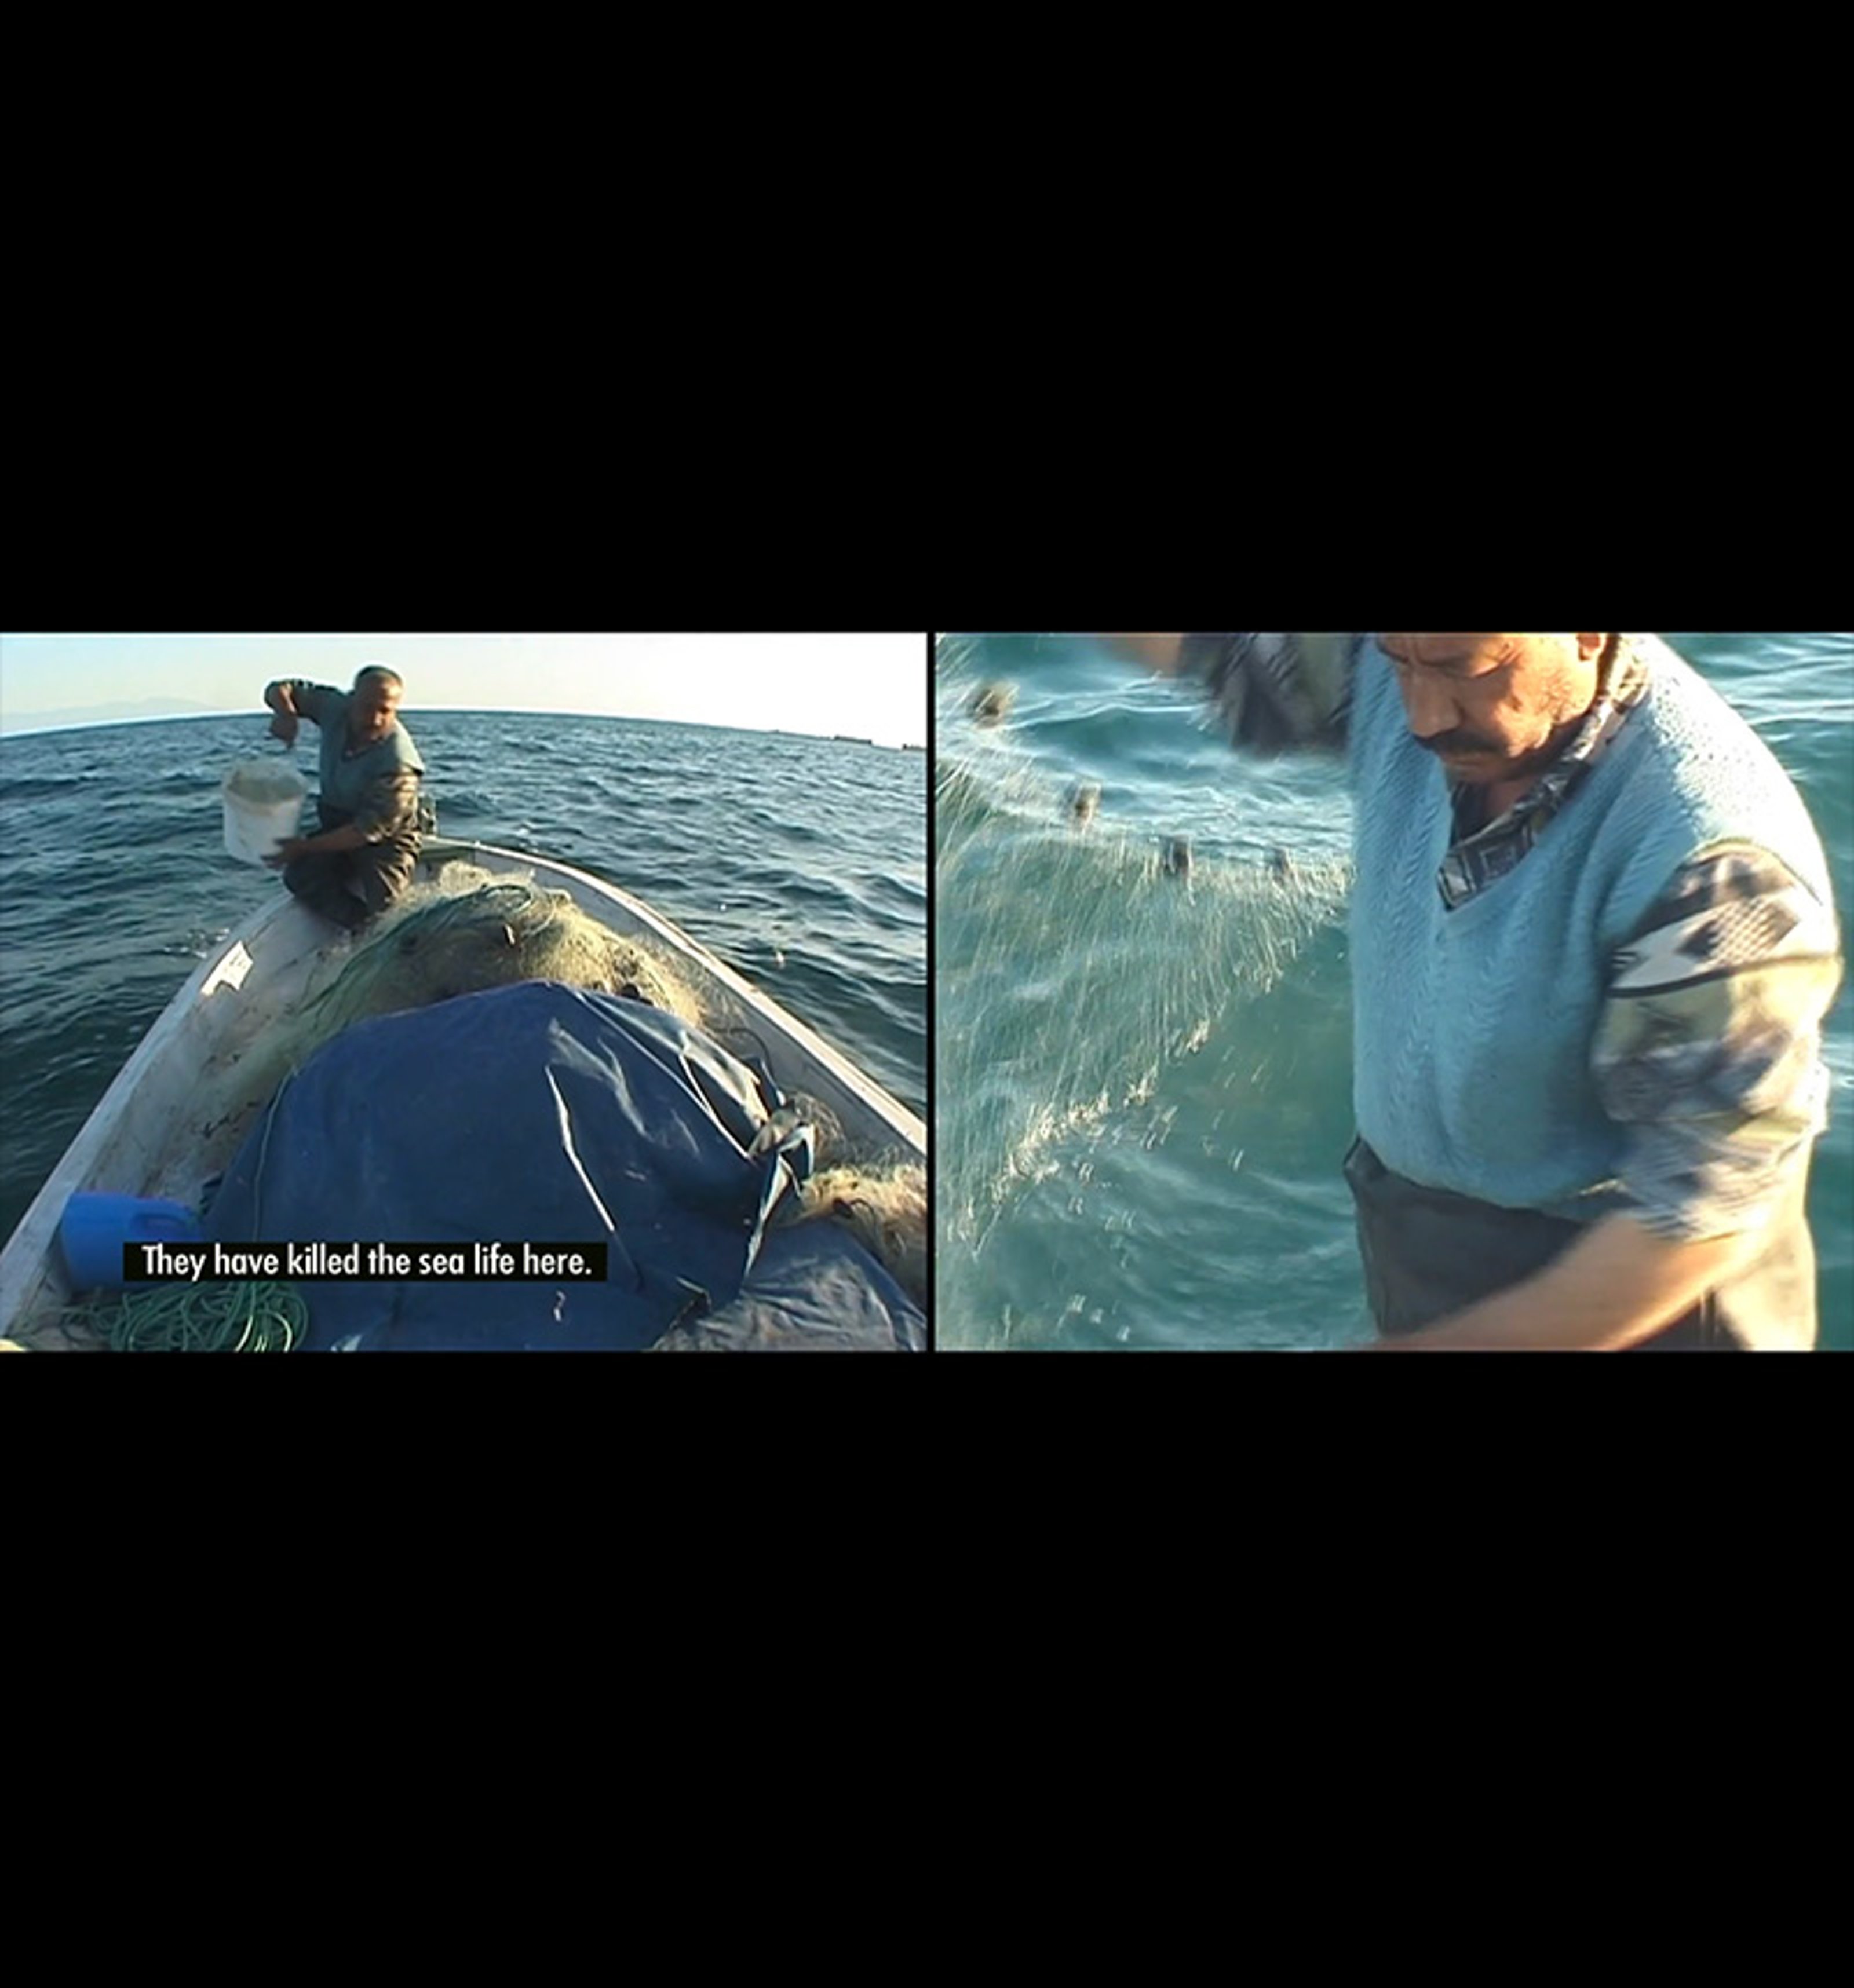 Still from two channel video. On the left is a fisherman on a boat, pulling a bucket out of the sea. He is saying: "They have killed the sea life here." On the right channel is the fisherman pulling webs out of the water.